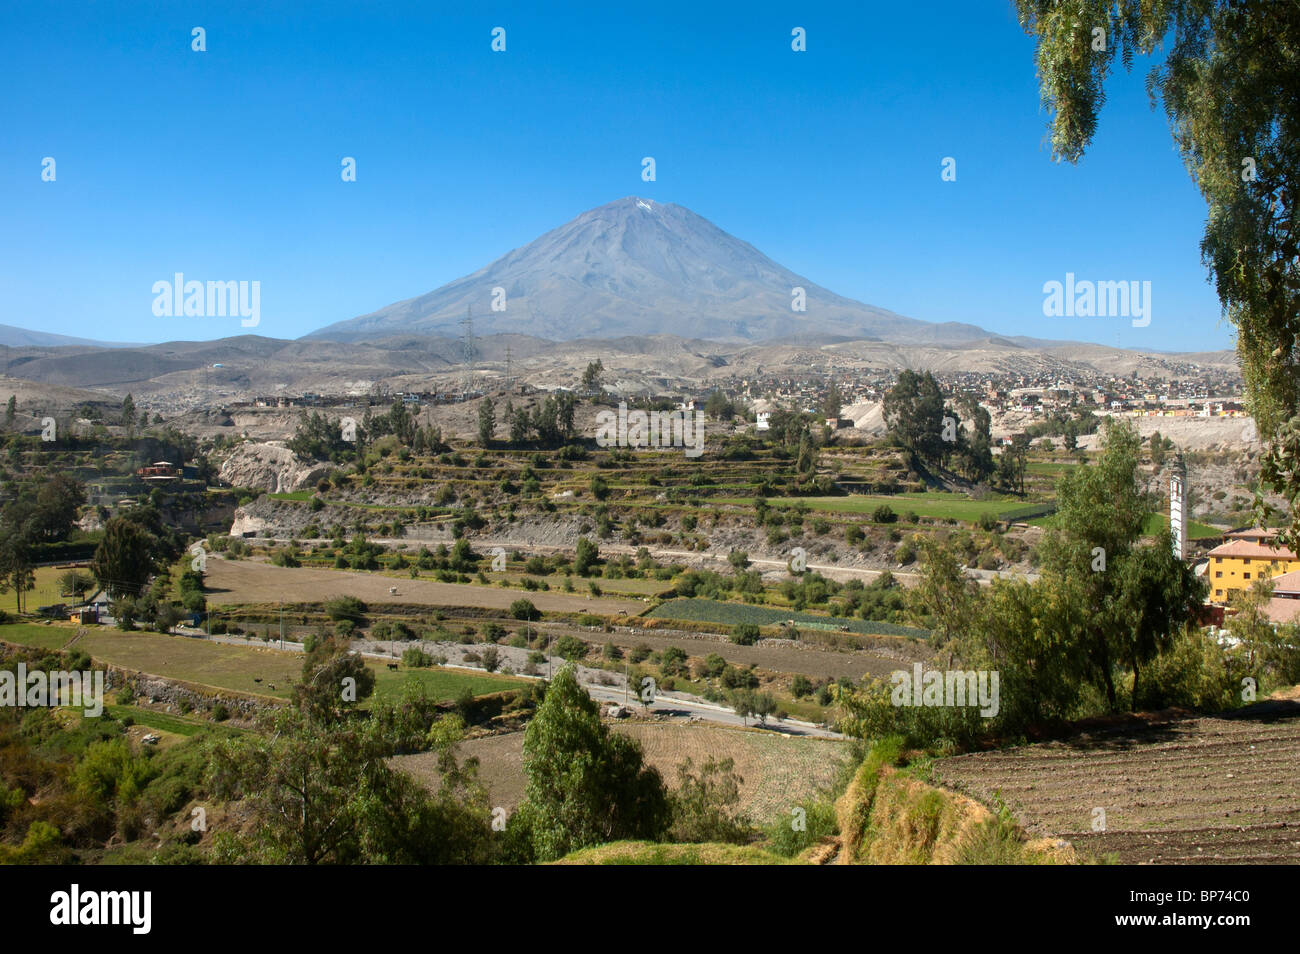 El Misti, volcano, in the distance over the suburbs of Arequipa, Peru. Stock Photo